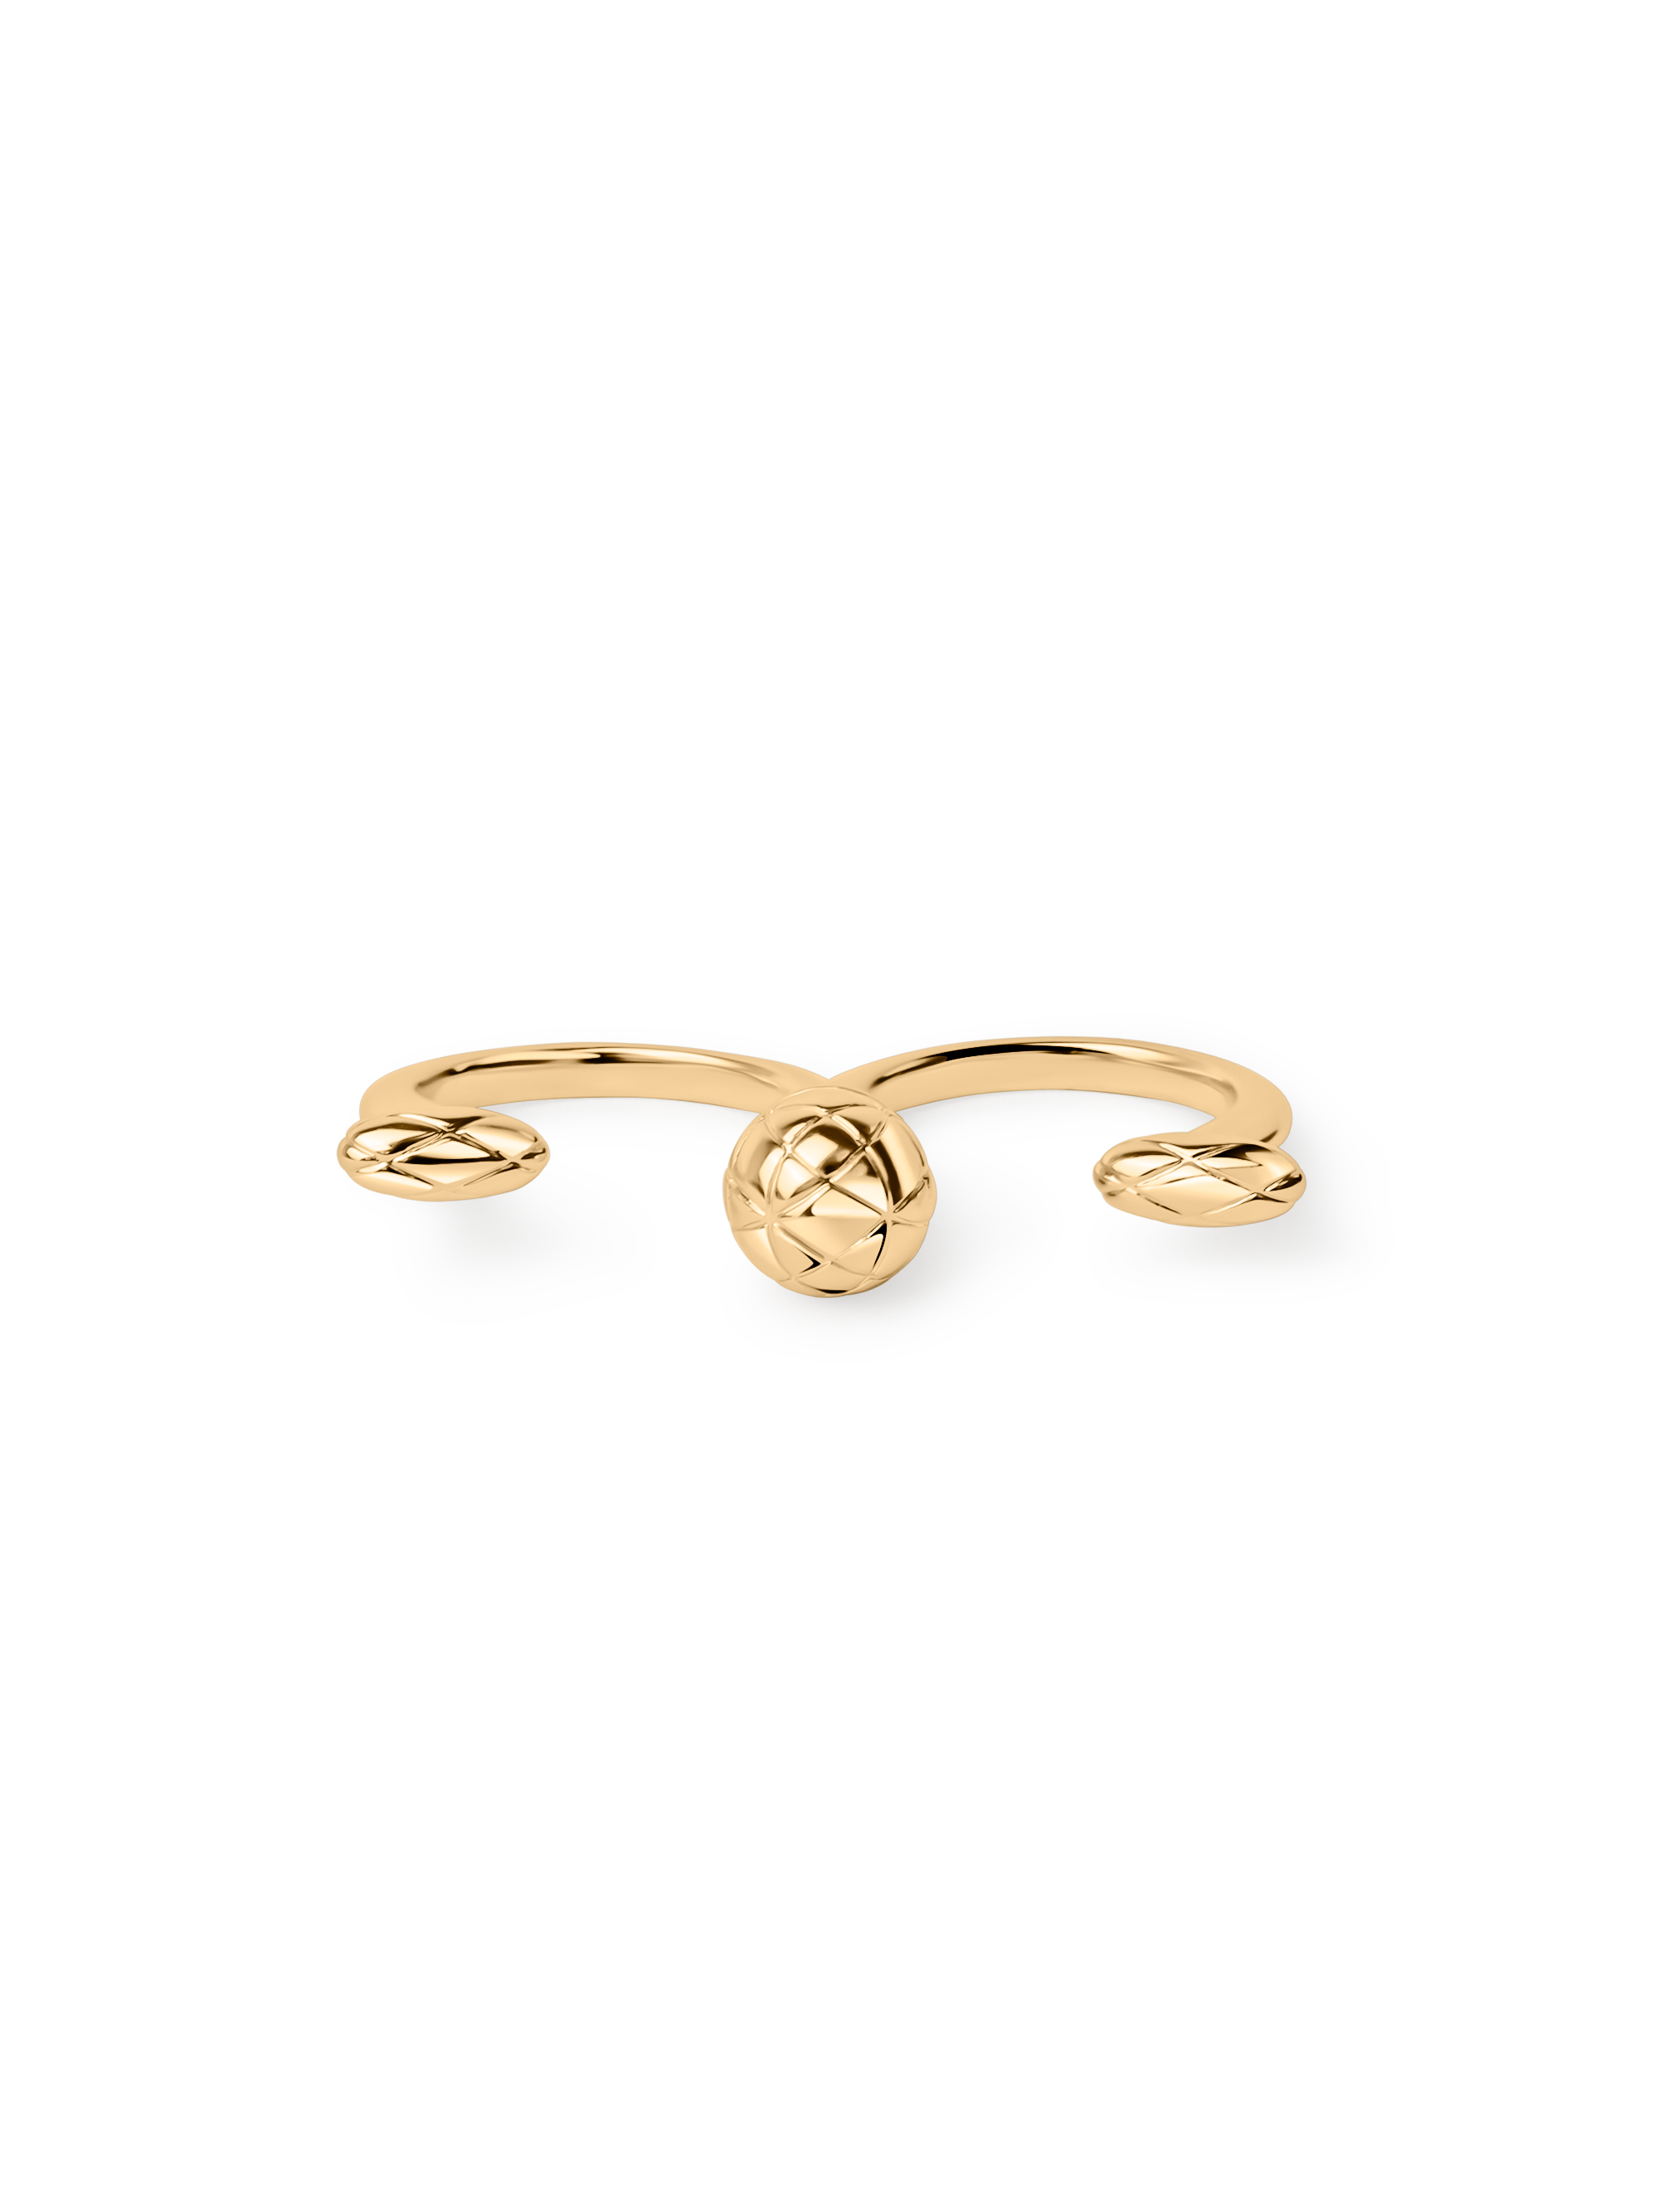 Double Ring by Janni Delér 18k gold plated brass